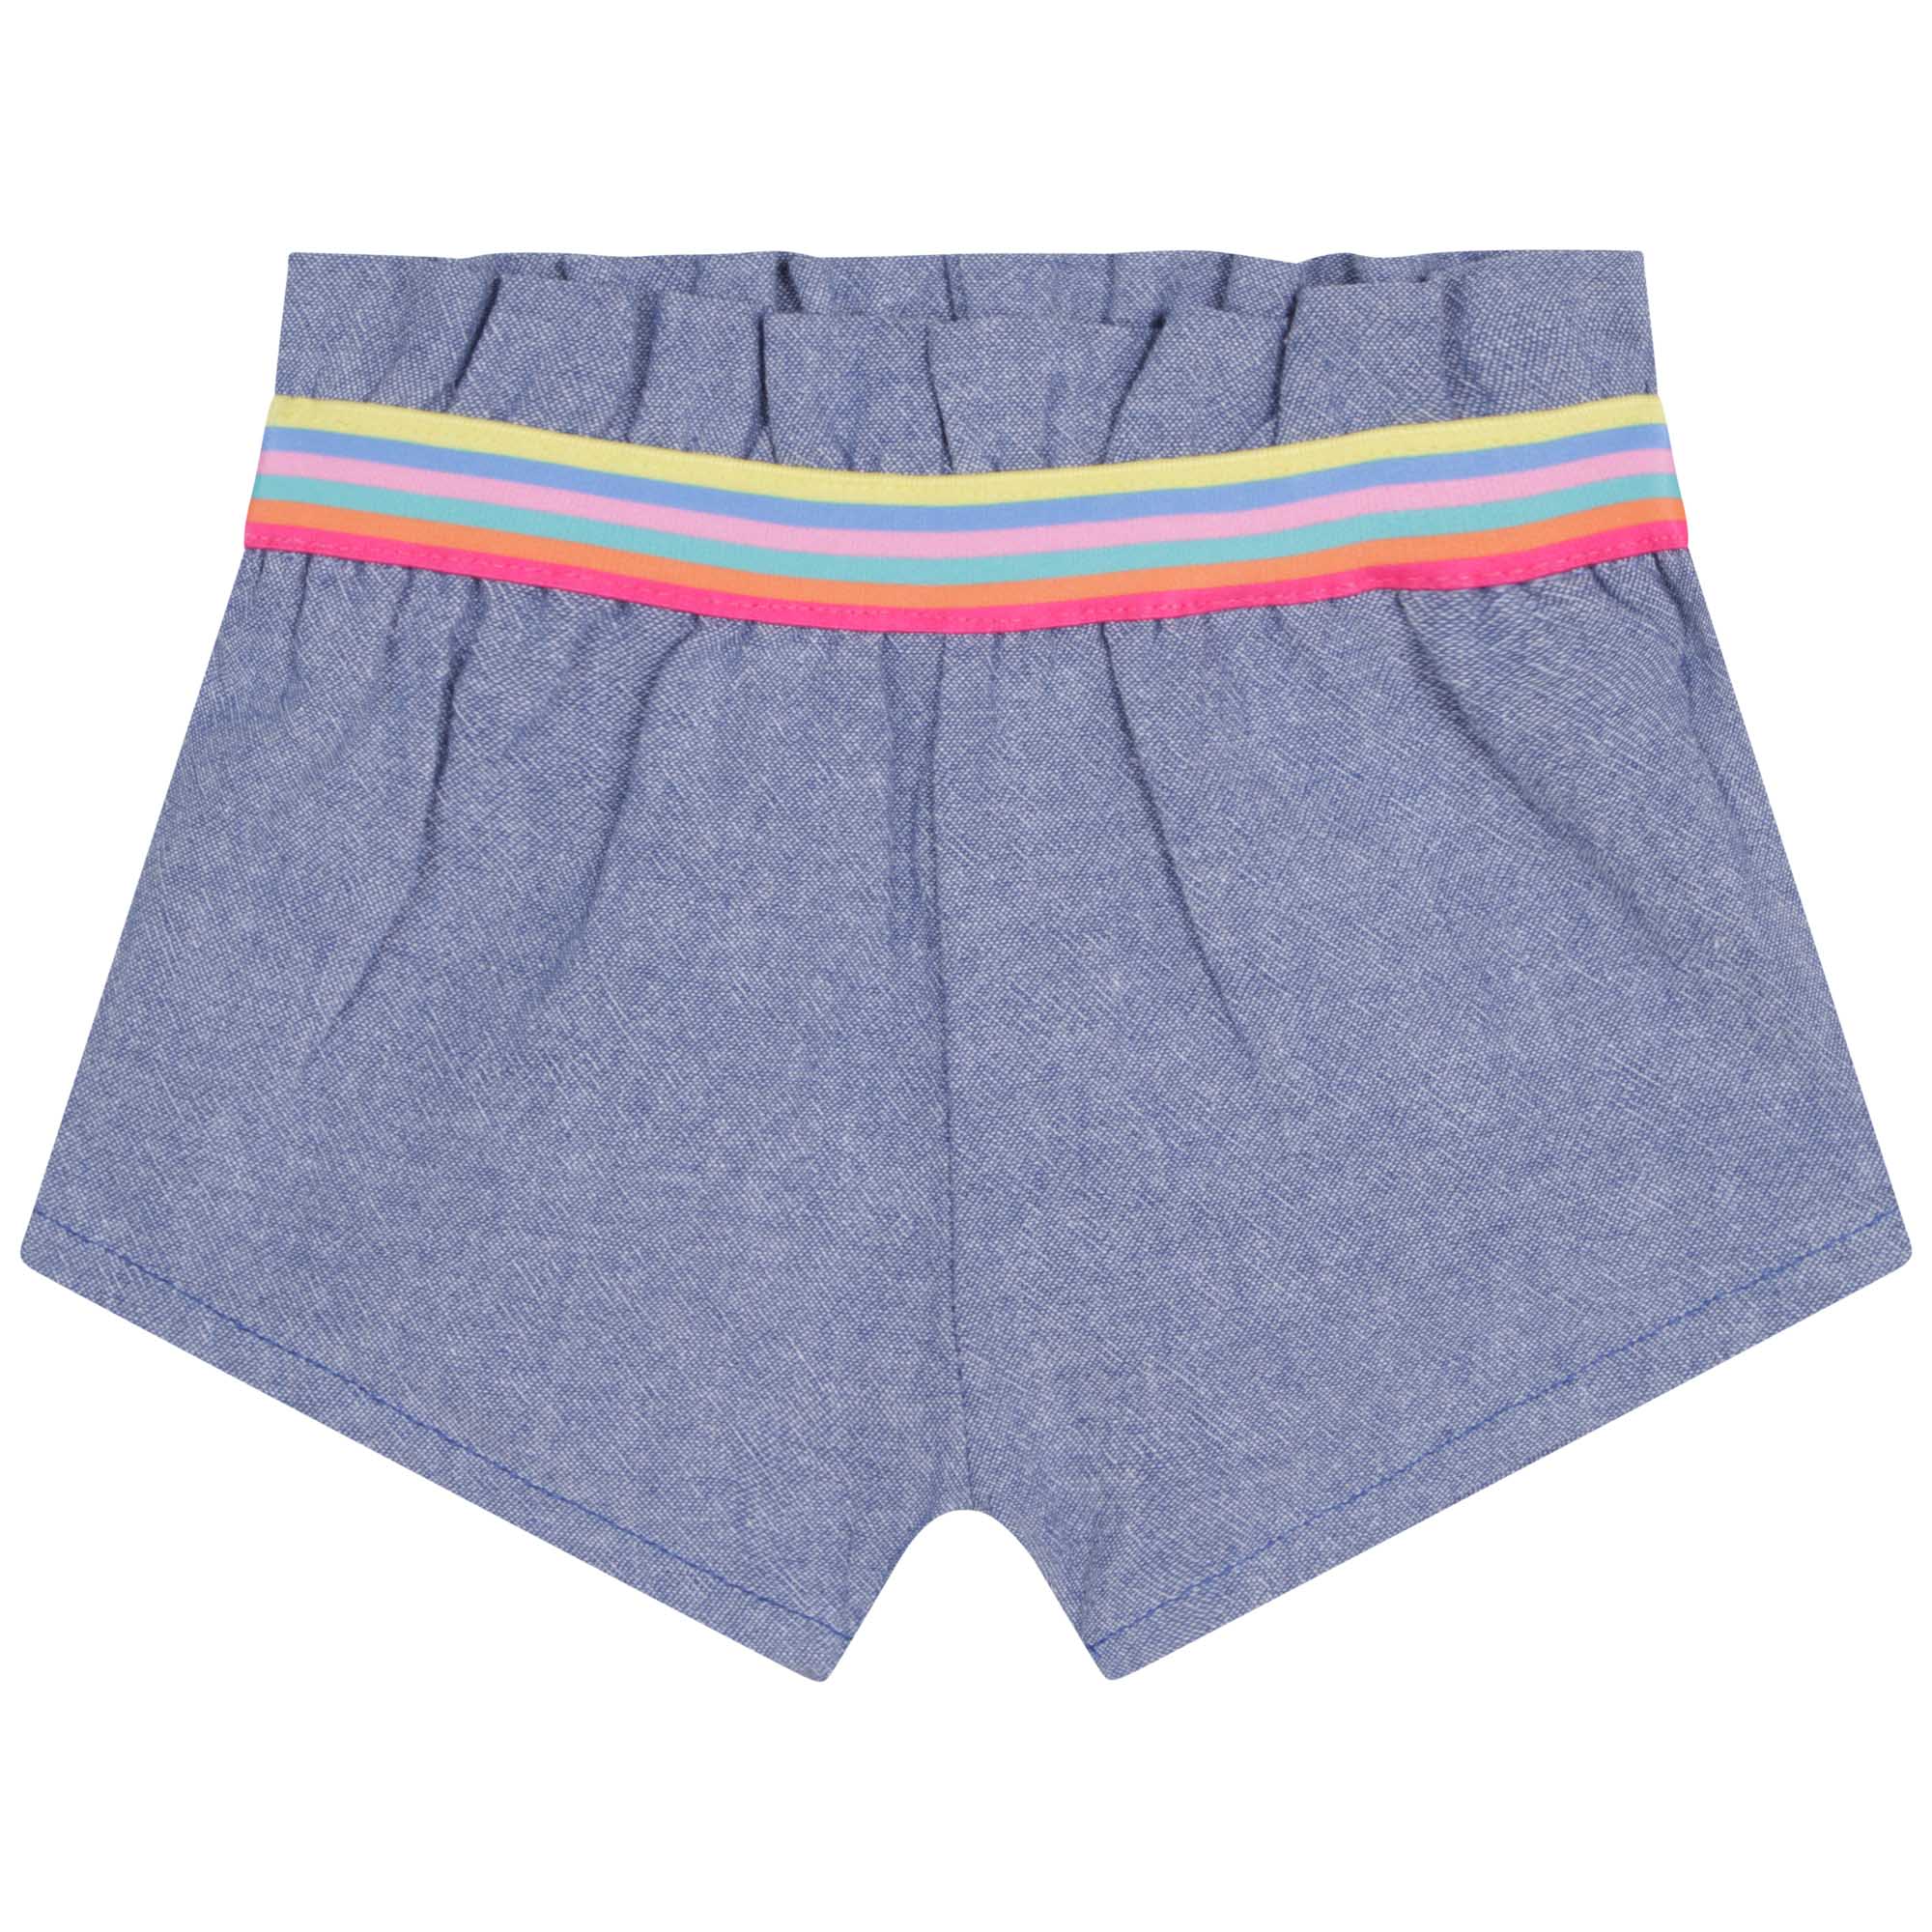 Shorts and T-shirt set MARC JACOBS for UNISEX